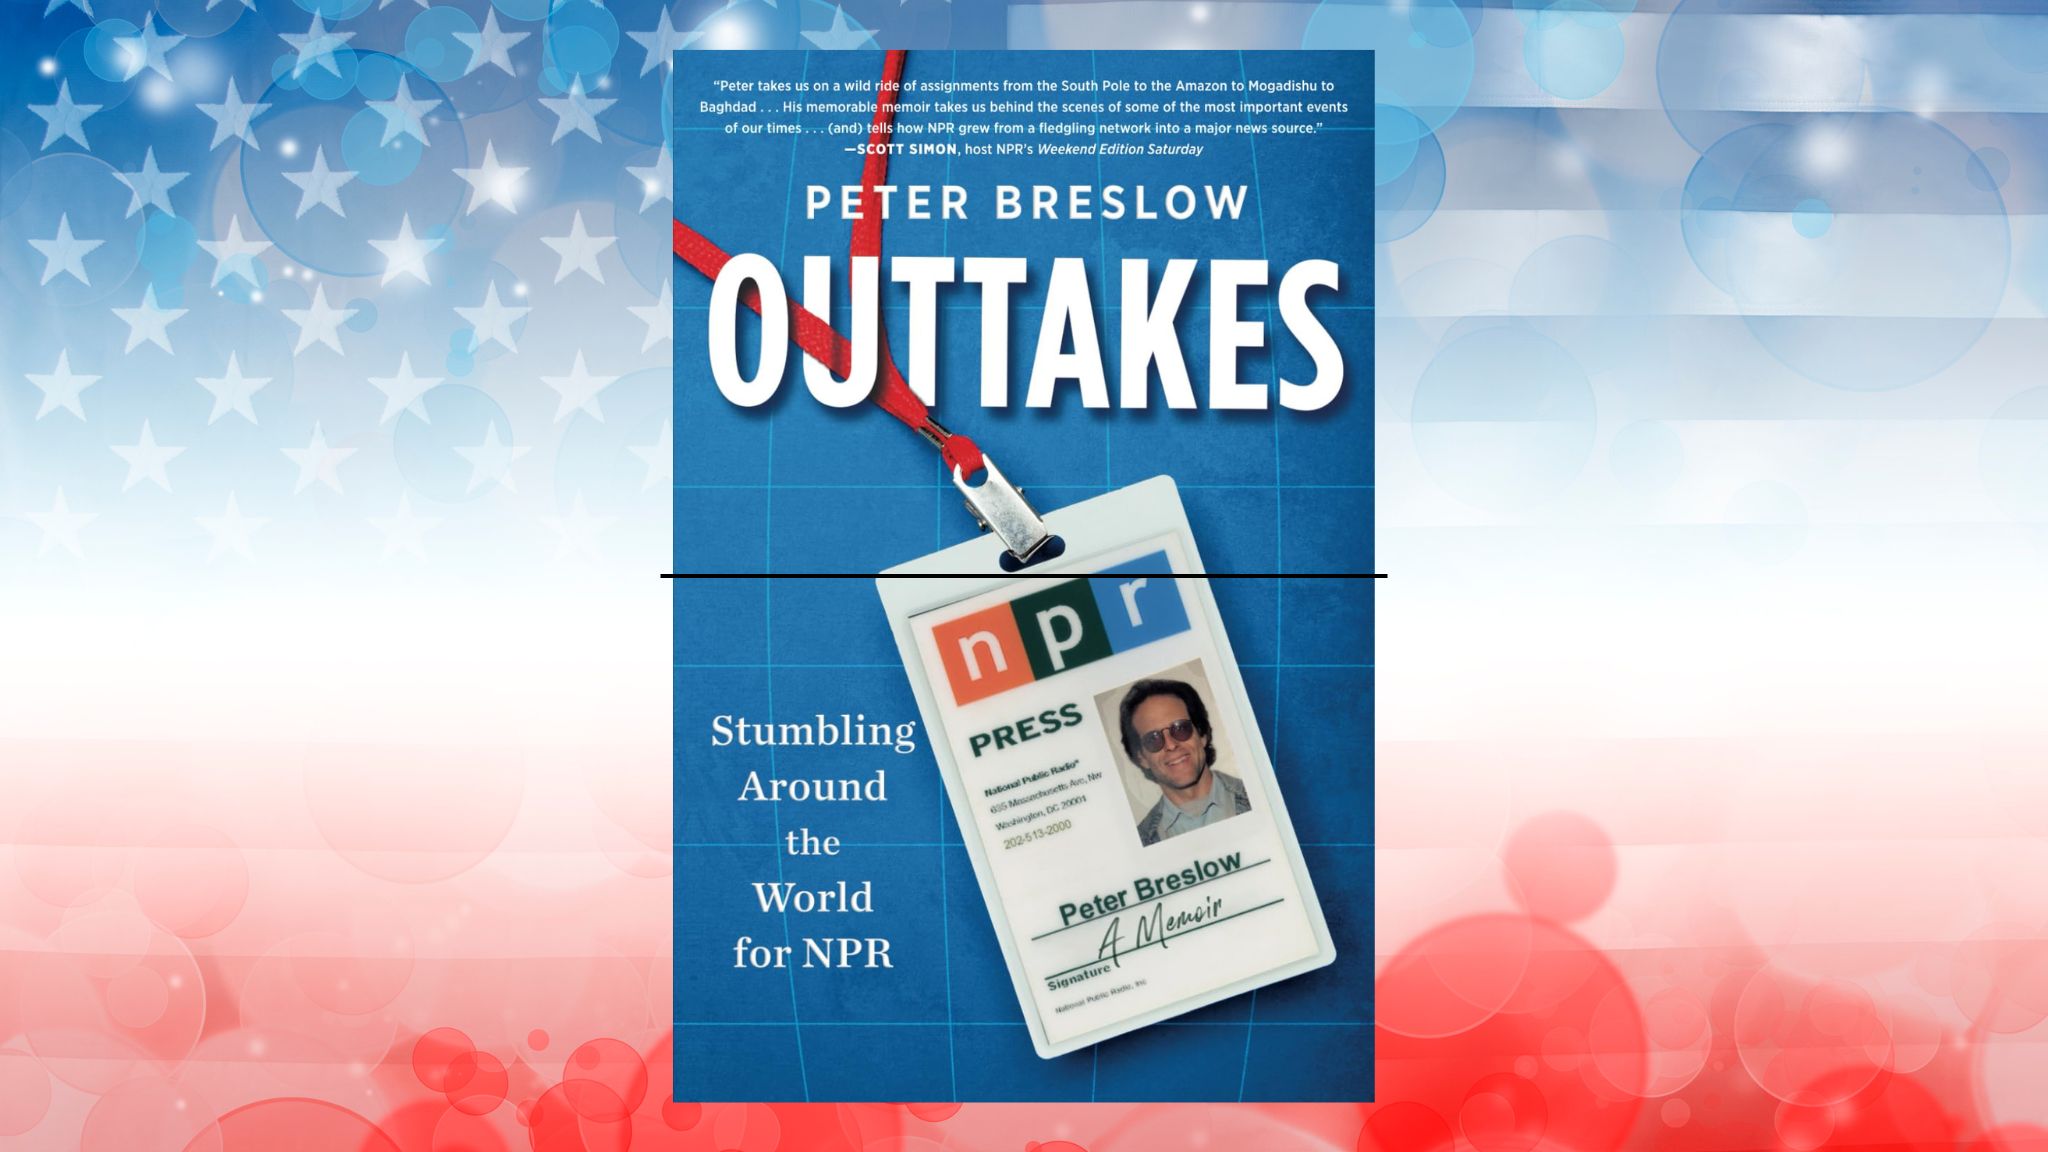 Outtakes by Peter Breslow | BookTrib